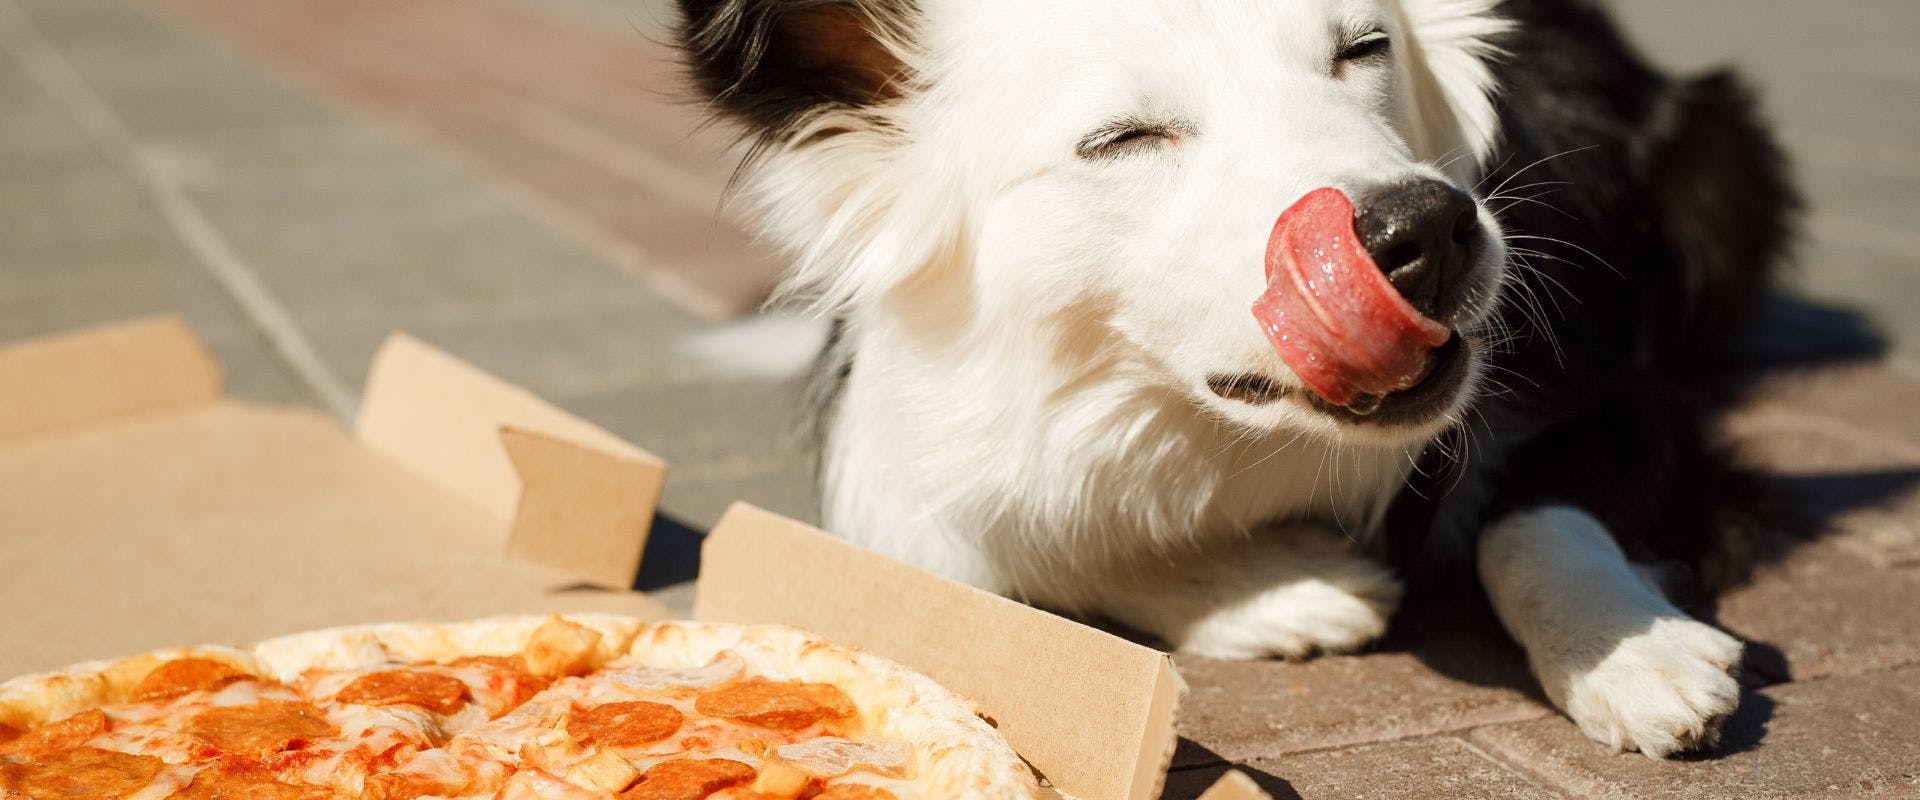 Border Collie dog sitting next to pepperoni pizza outside